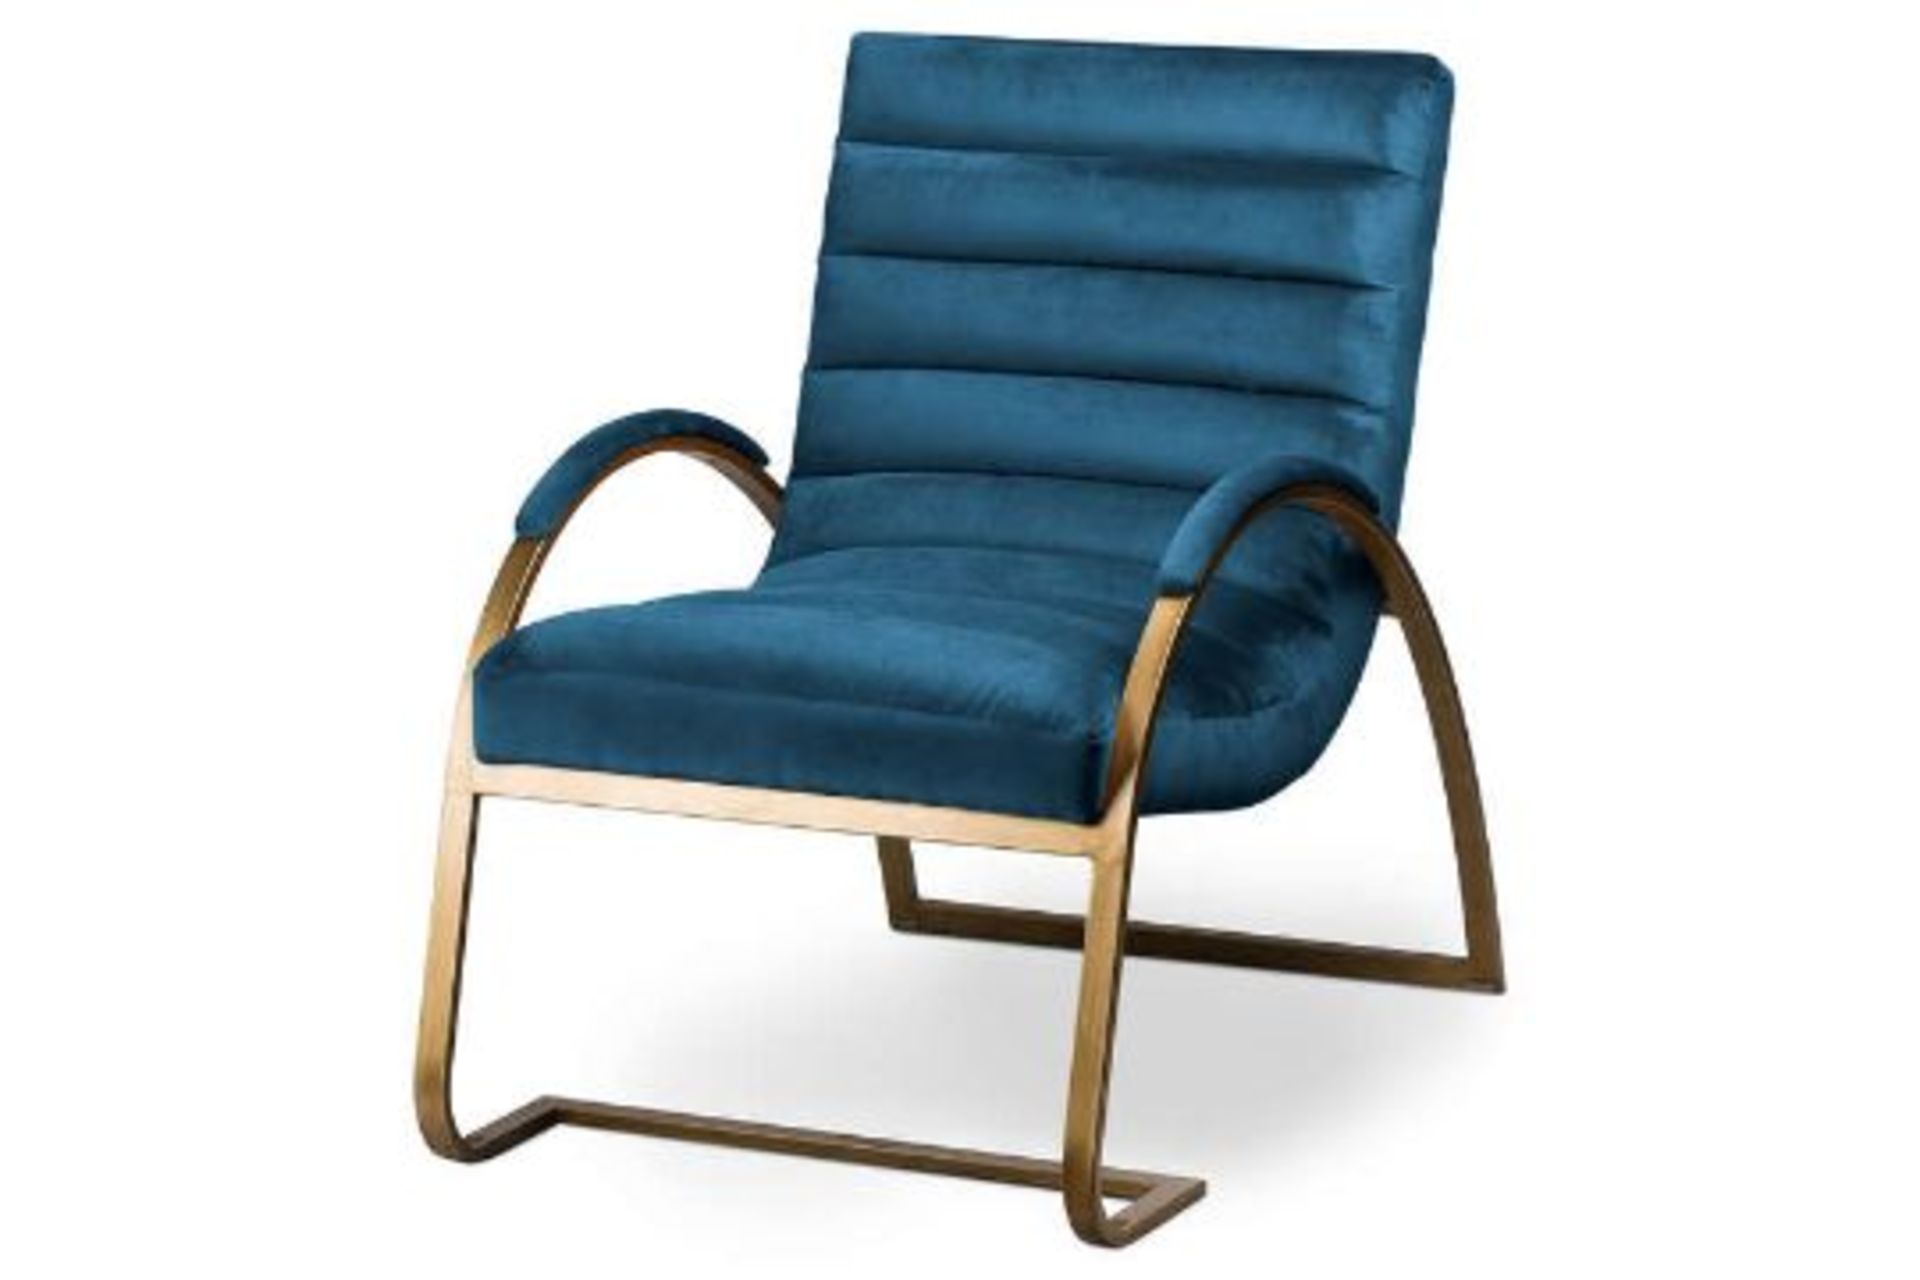 Arc Chair Oxford Navy Blue Velvet and Brass Ribbed Ark Chair curate a stylish yet comfortable - Image 3 of 3